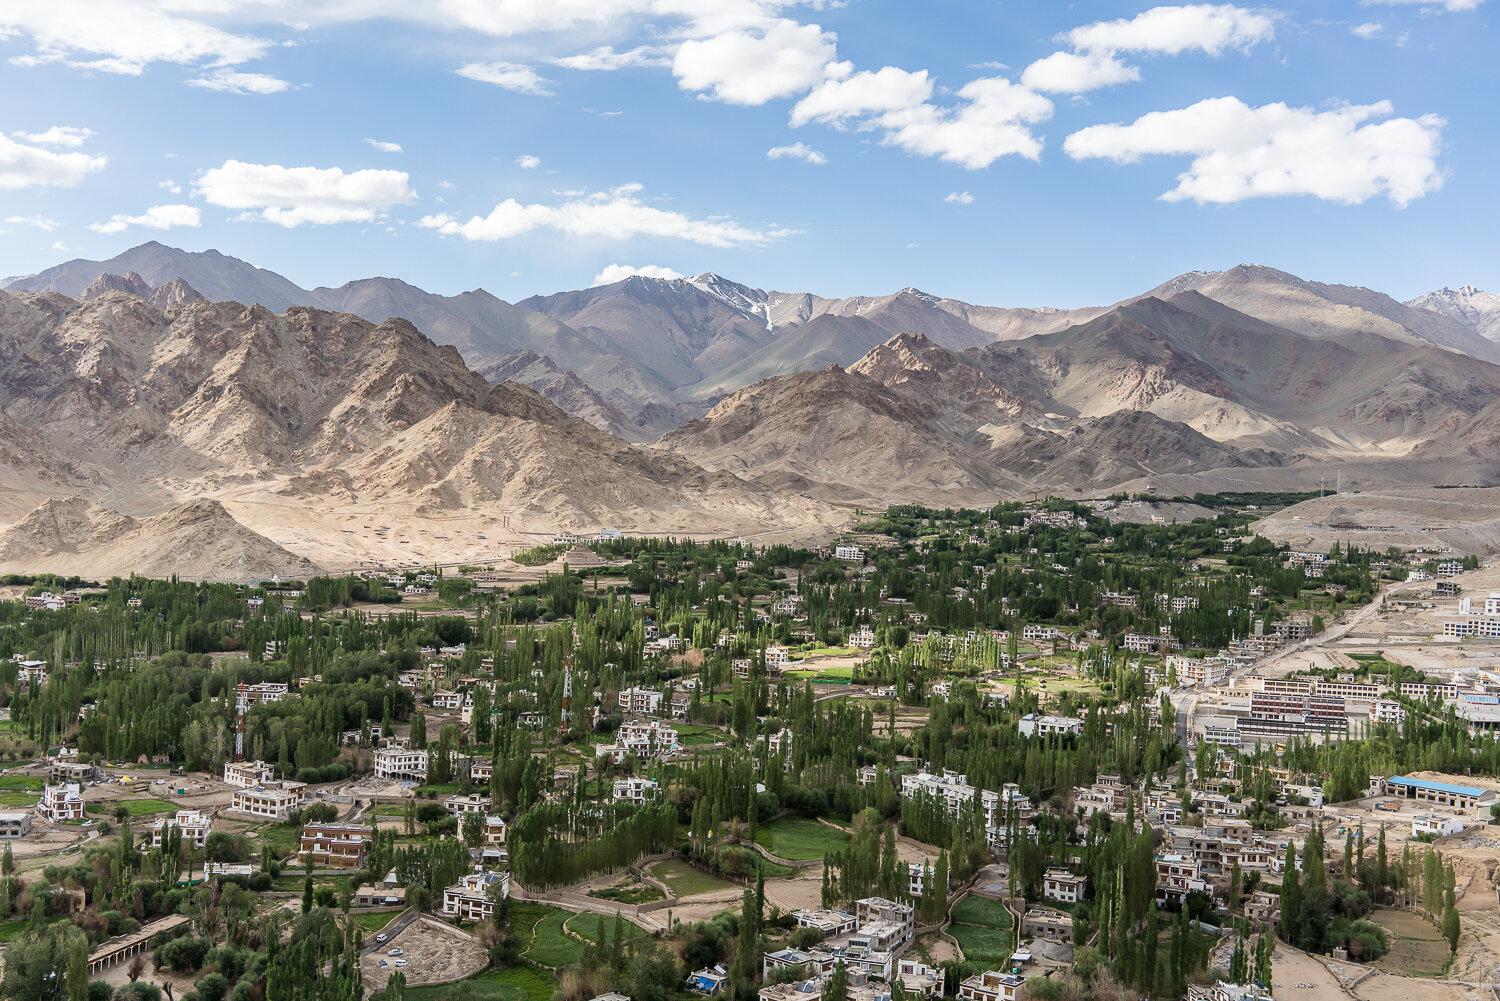  A view of the city from the Namgyal Tsemo Temple on Thursday, August 8, 2019 in Leh, Ladakh, India. The green areas reflect the original settlement of the valley with ready access to streams and springs. 